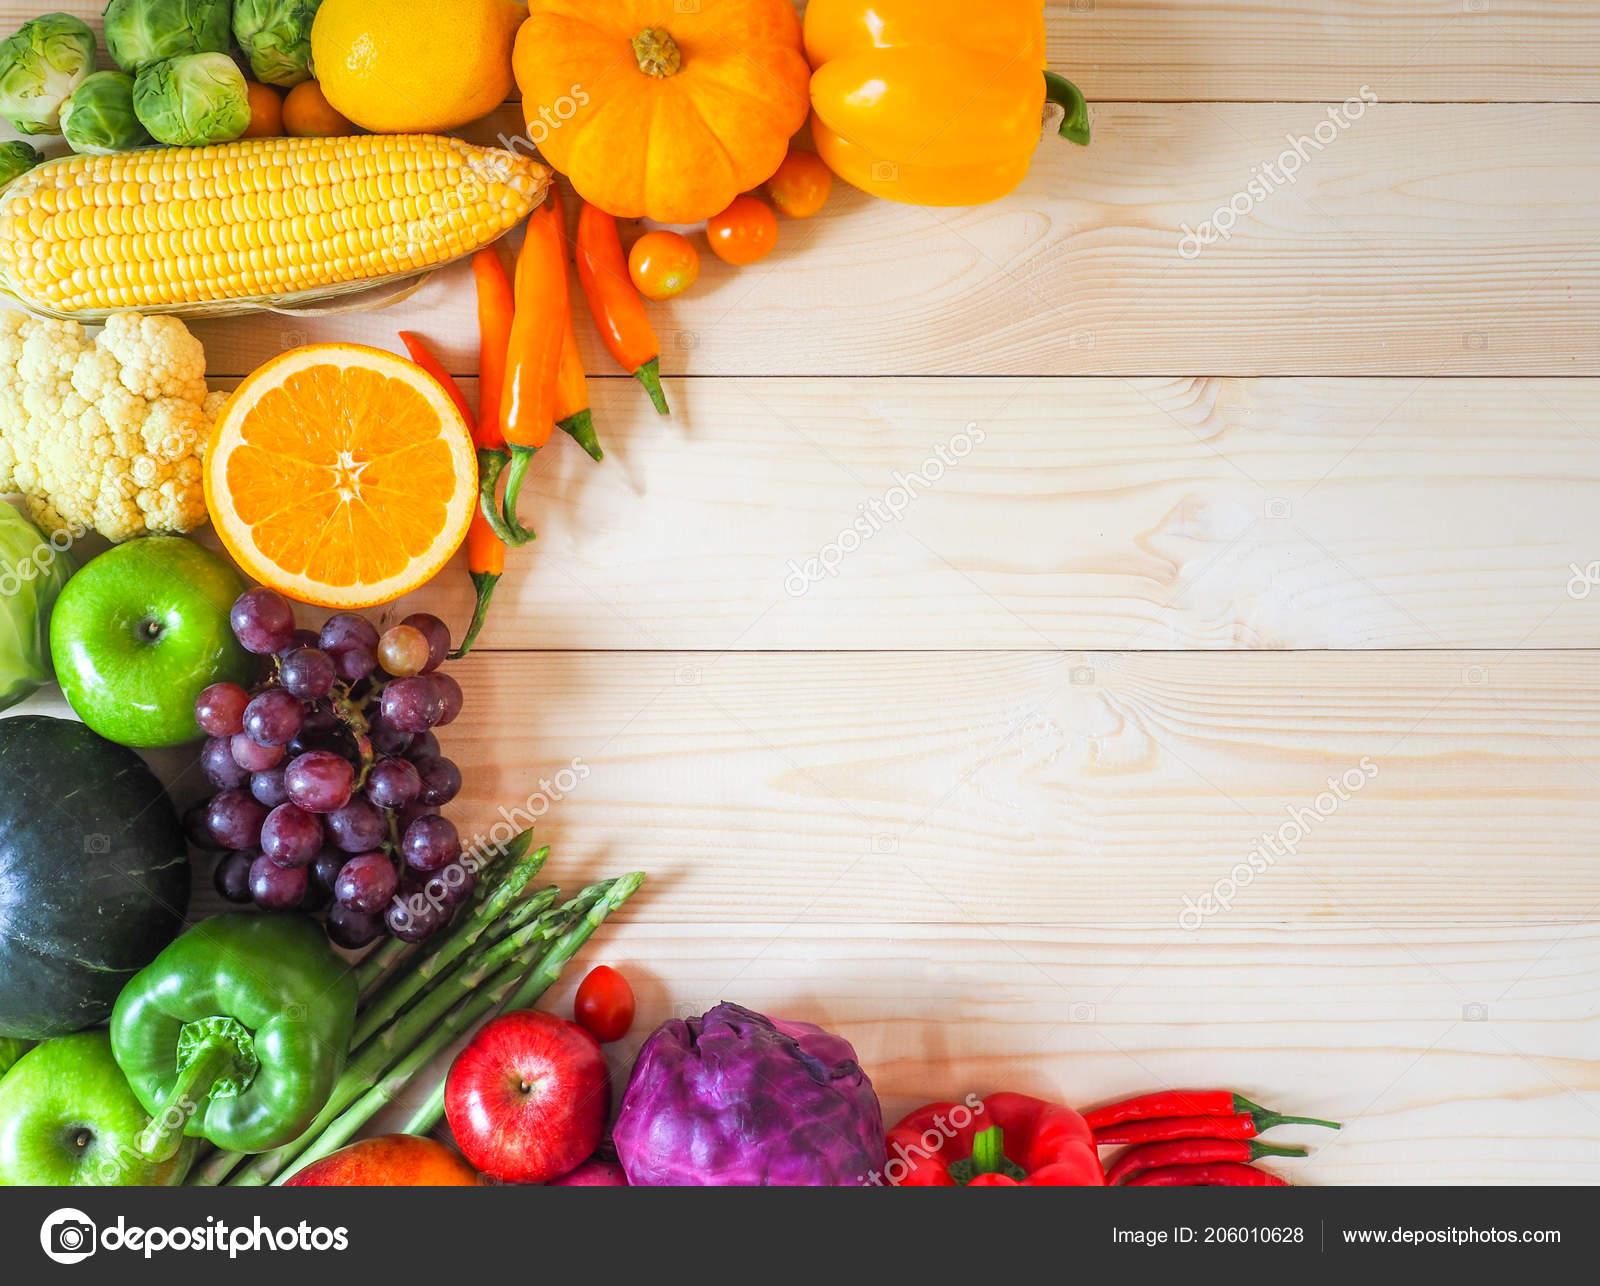 Fruits And Vegetables Background - 1600x1286 Wallpaper 